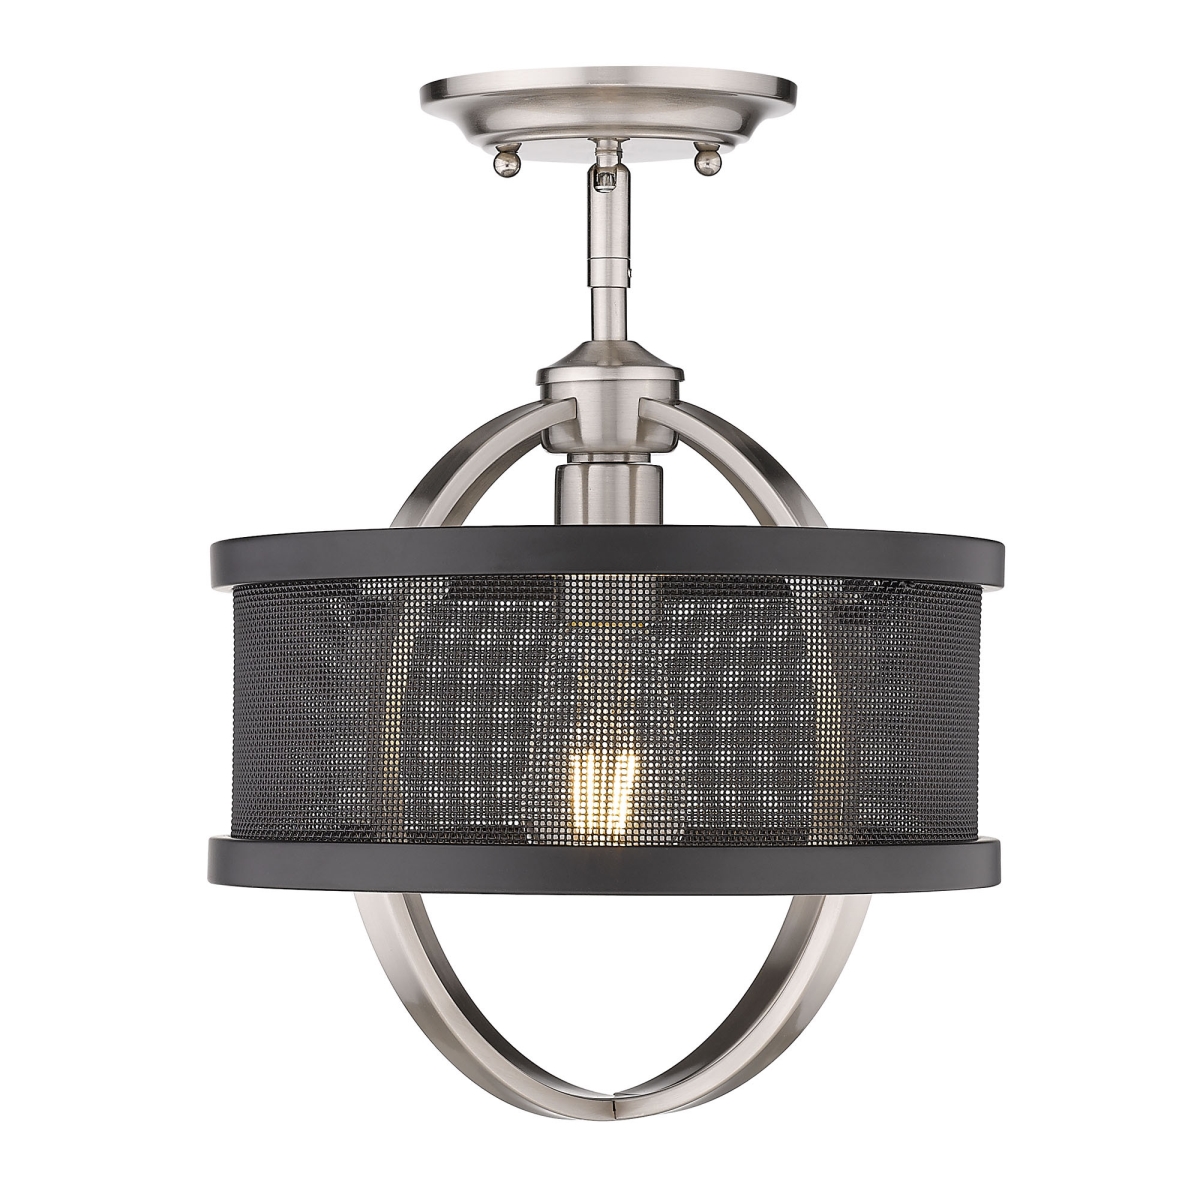 3167-1sf Pw-blk Colson With Matte Black Shade, Pewter